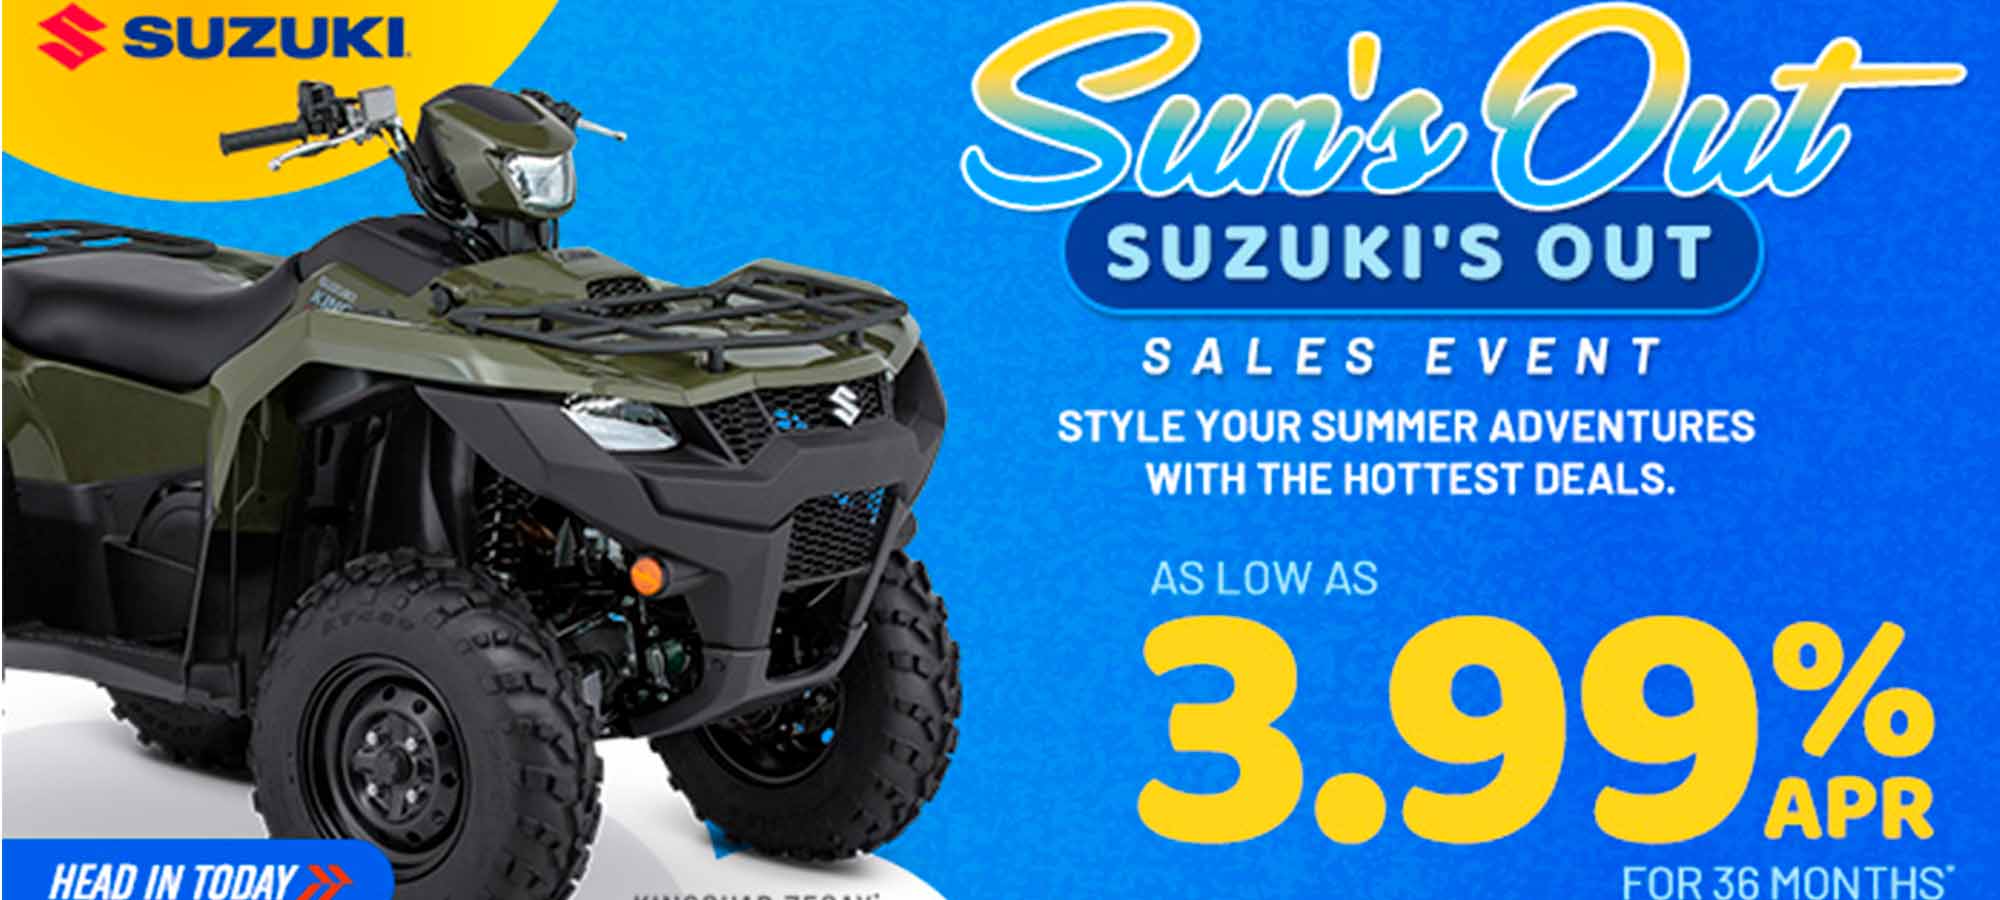 Suzuki US - Sun's Out Suzuki's Out Sales Event at Brenny's Motorcycle Clinic, Bettendorf, IA 52722